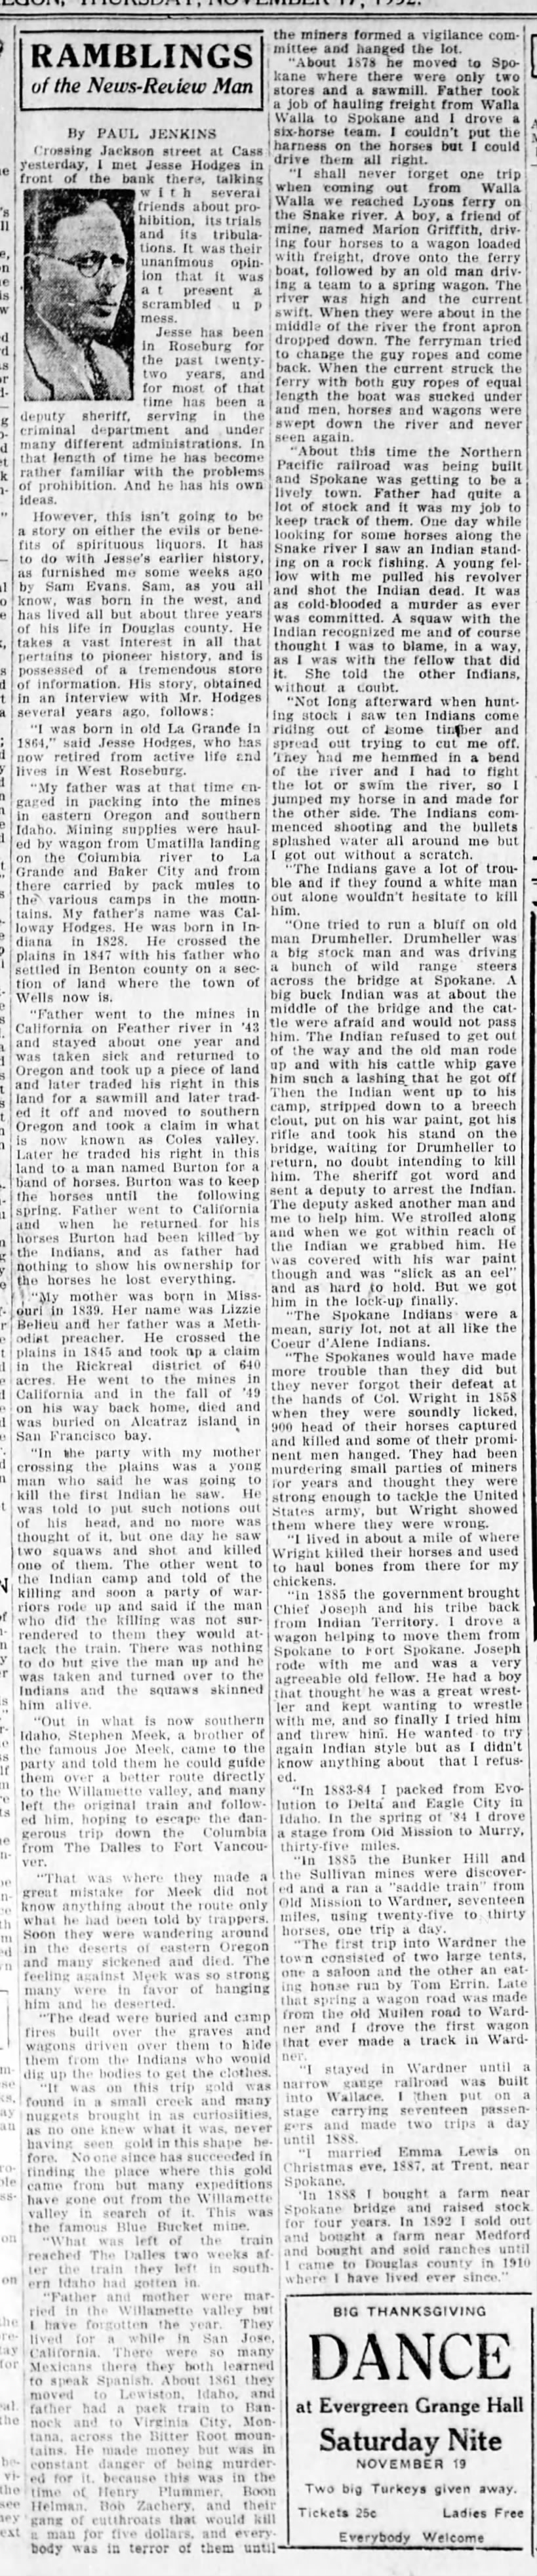 Calloway Hodges life story, as told by his son. The News-Review, Roseburg Oregon, Nov. 17, 1932